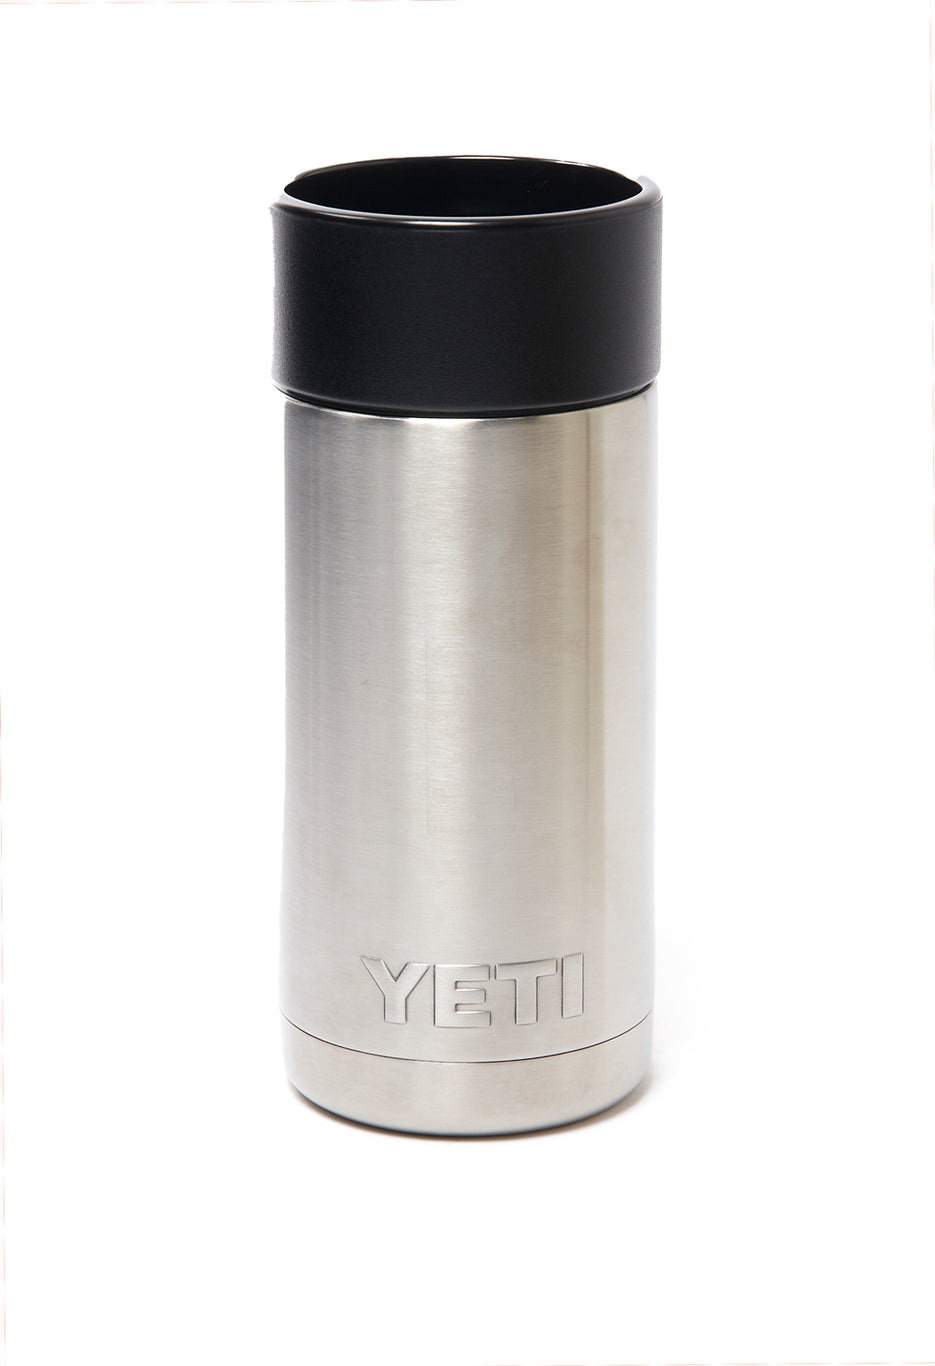 Yeti Rambler Thermos Hotshot Cap 12oz Leak Proof Insulated Black and Silver